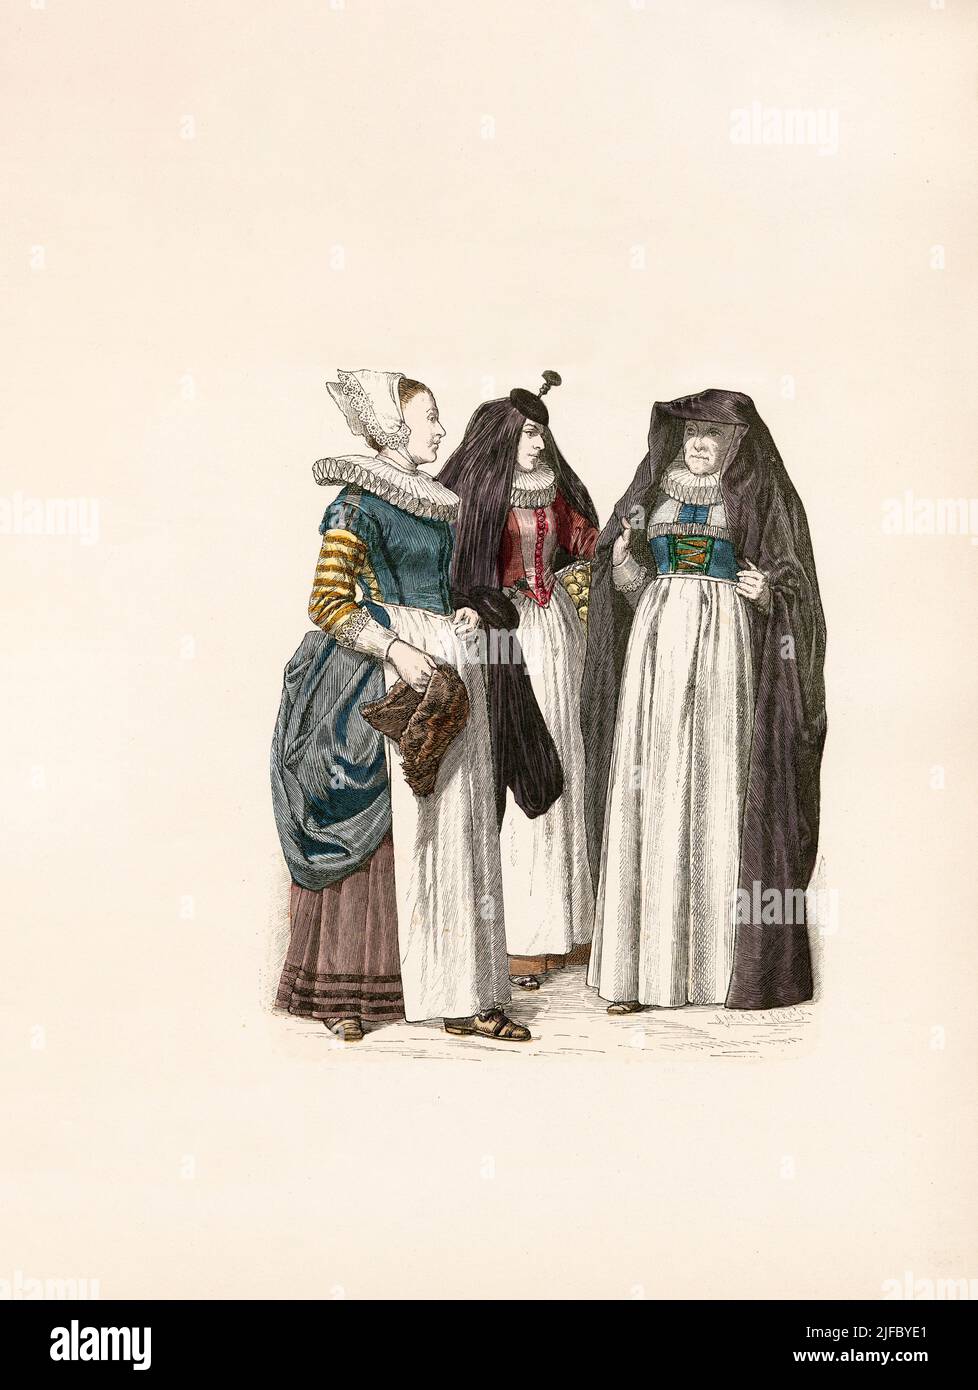 Servant Girl, Townswoman from Cologne, Matron, Germany, German mid-17th Century Fashion, Illustration, The History of Costume, Braun & Schneider, Munich, Germany, 1861-1880 Stock Photo